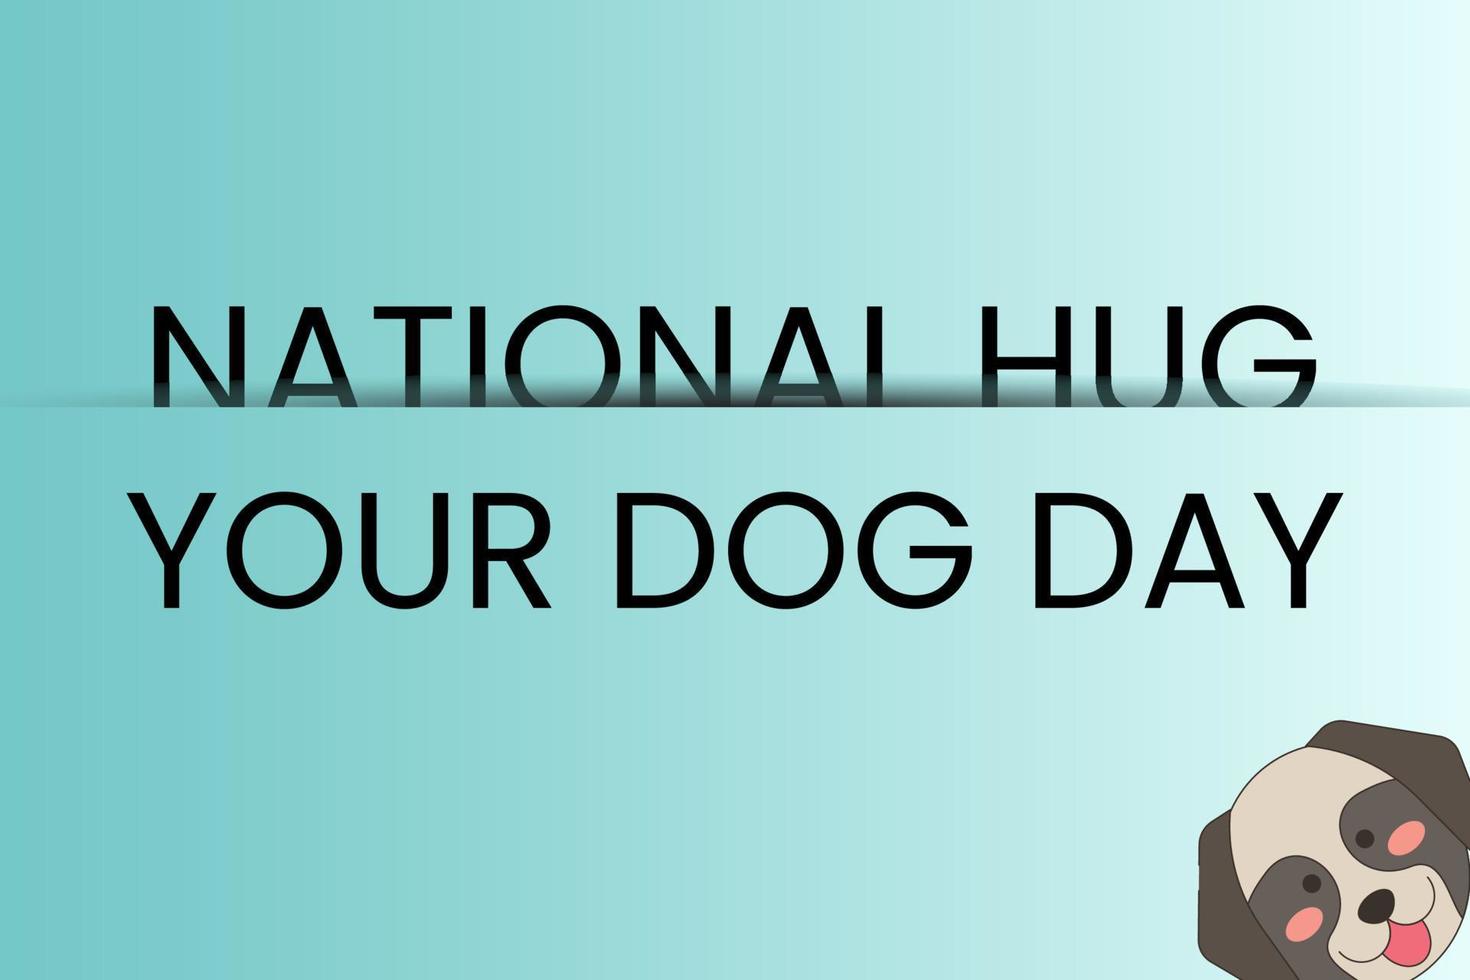 National Hug Your Dog Day is April 10 and Here Are 6 Gifts for